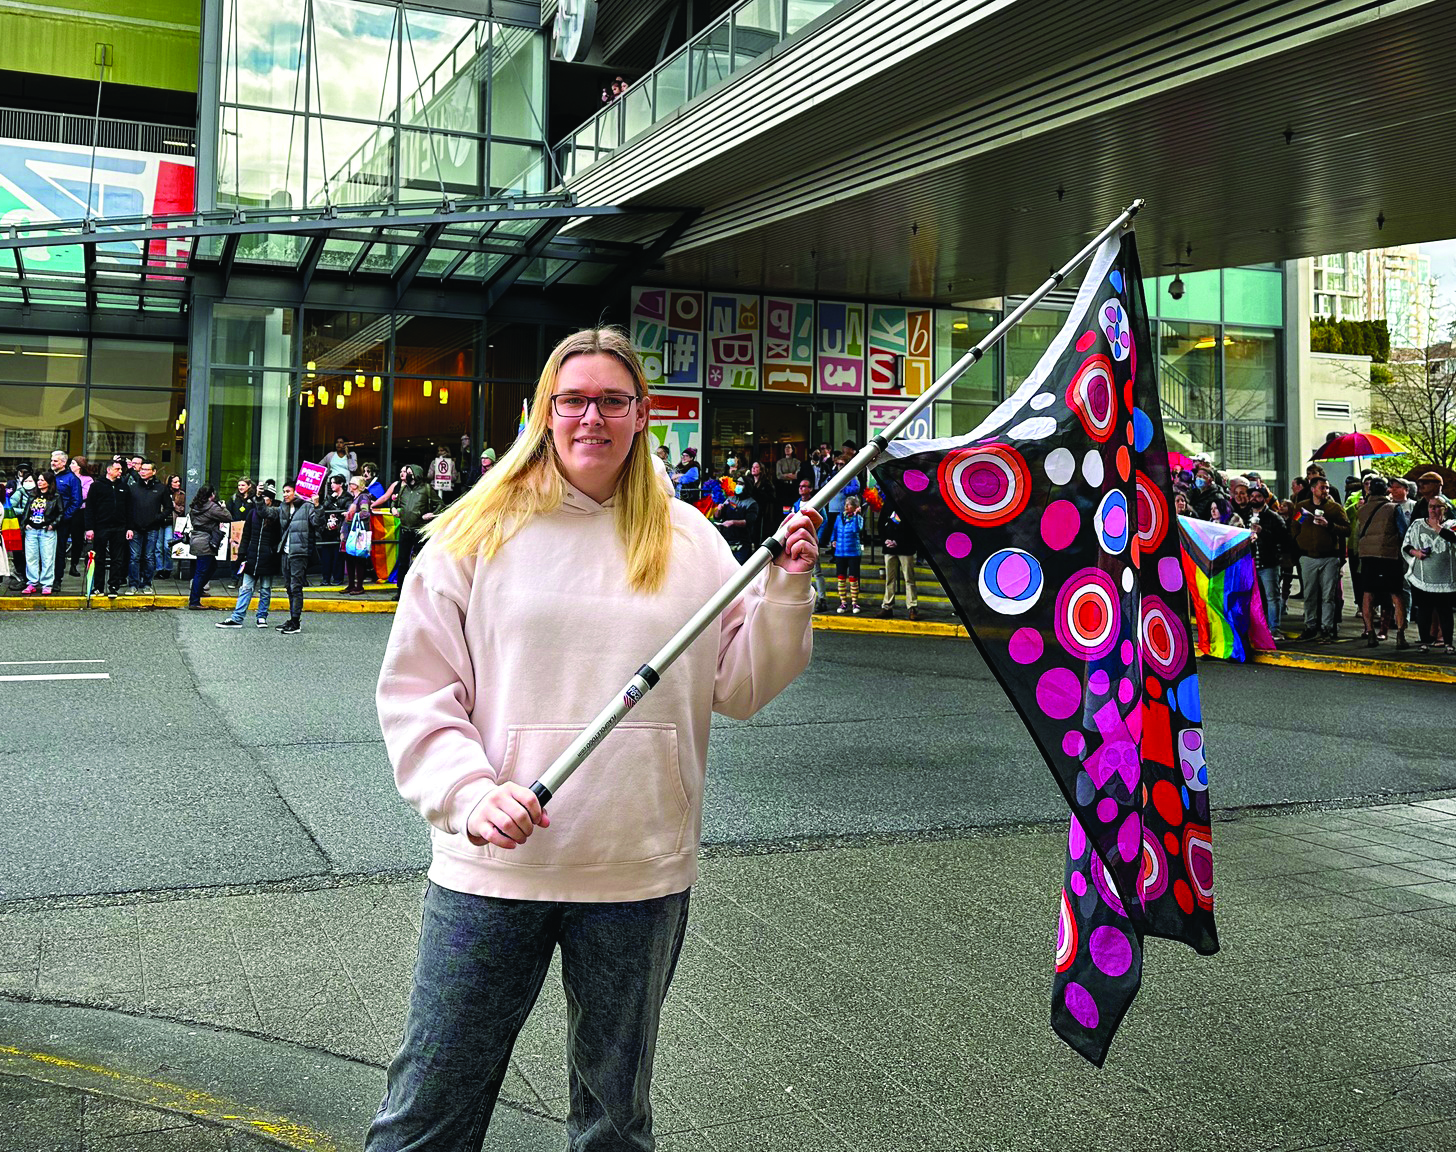 Nicola Spurling outside Coquitlam public library holding colourful flag